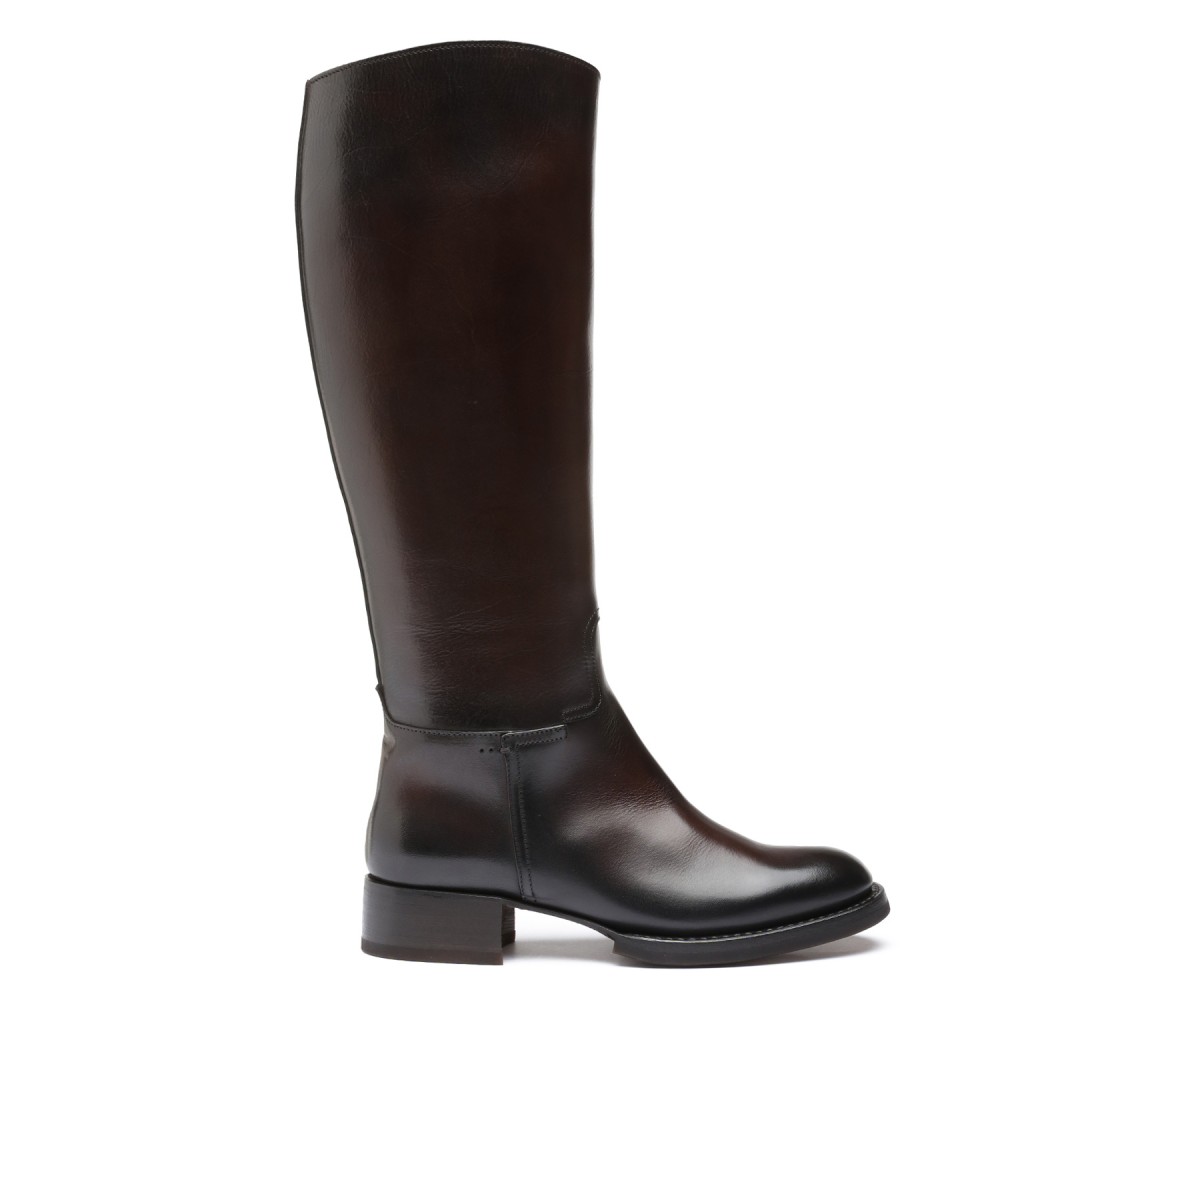 Firenze brown leather boots